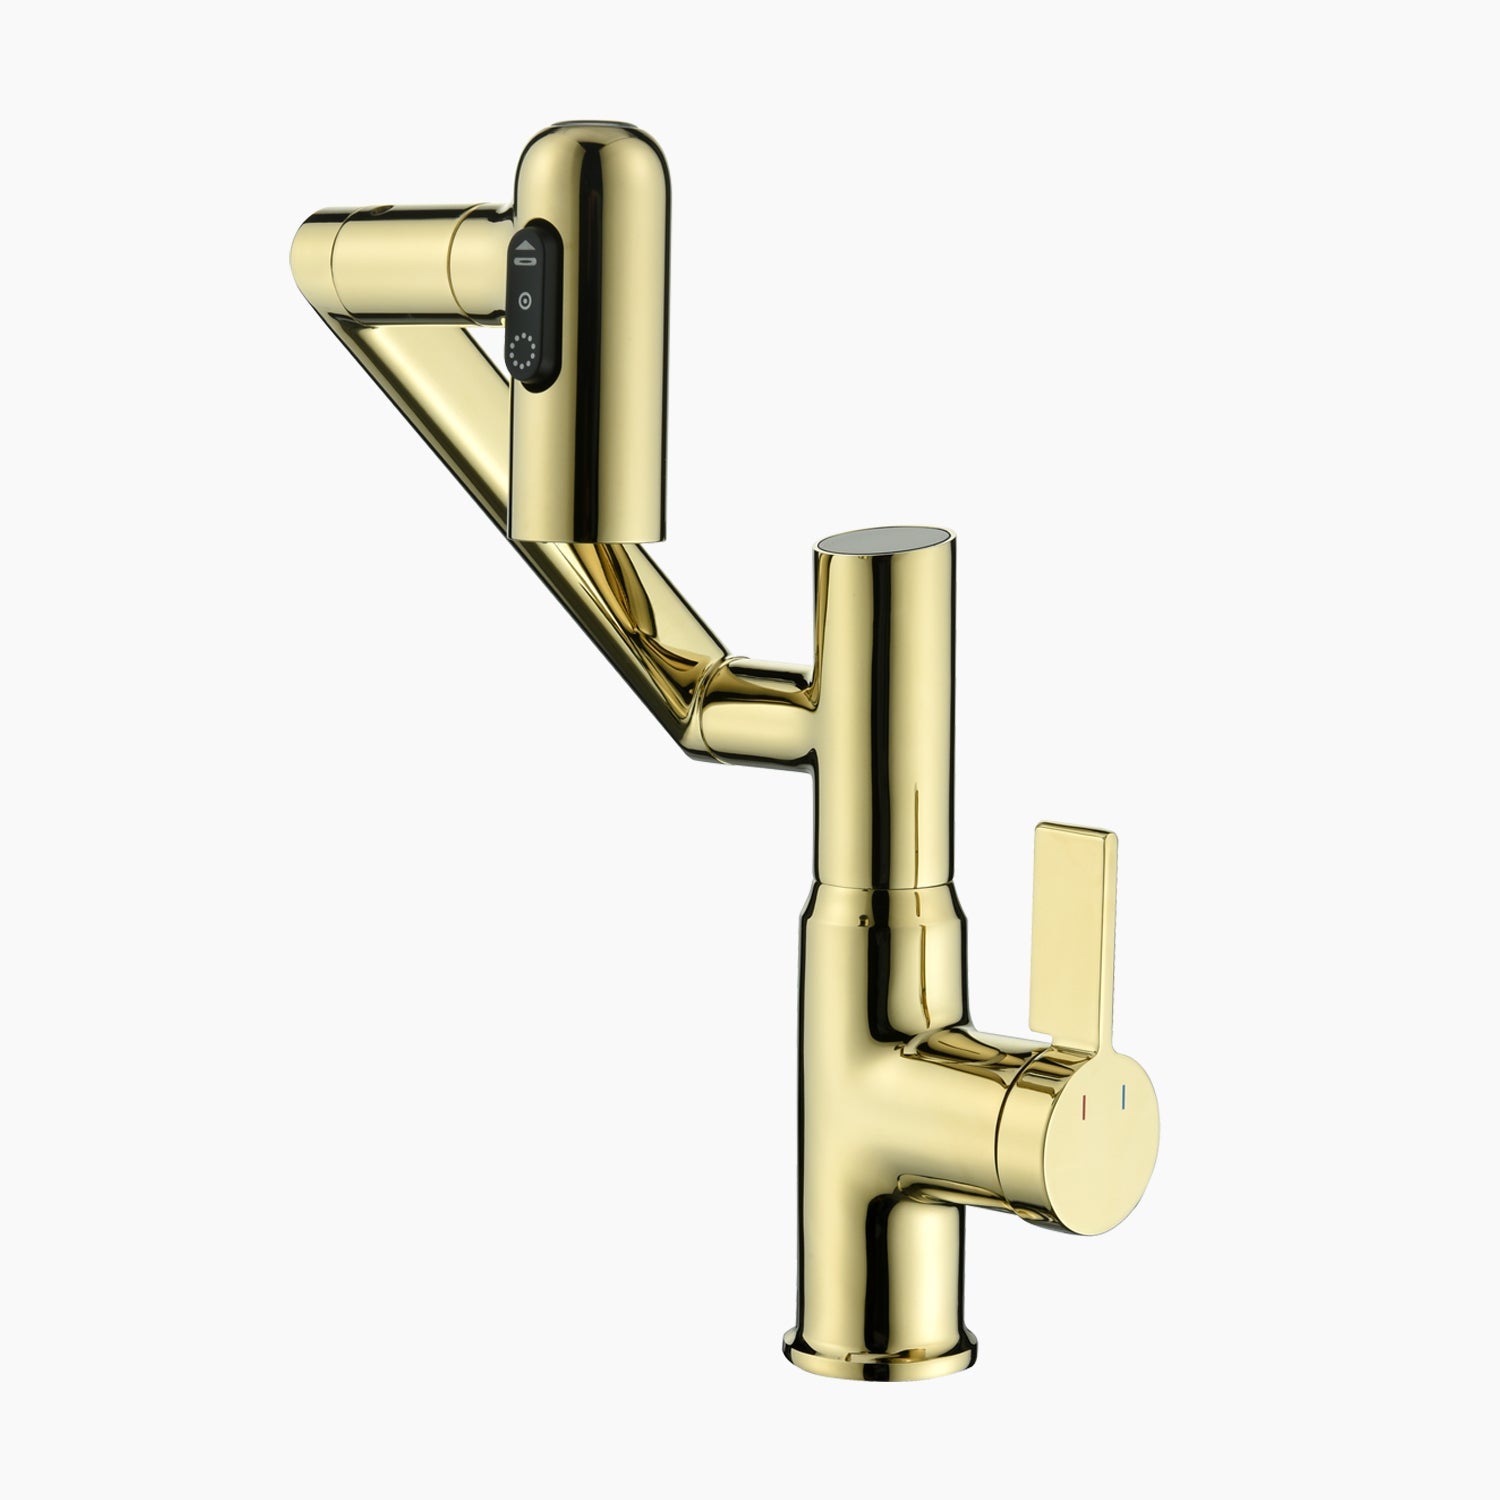 BF2204-5, Lefton Single-Hole Rotatable Faucet with Temperature Display